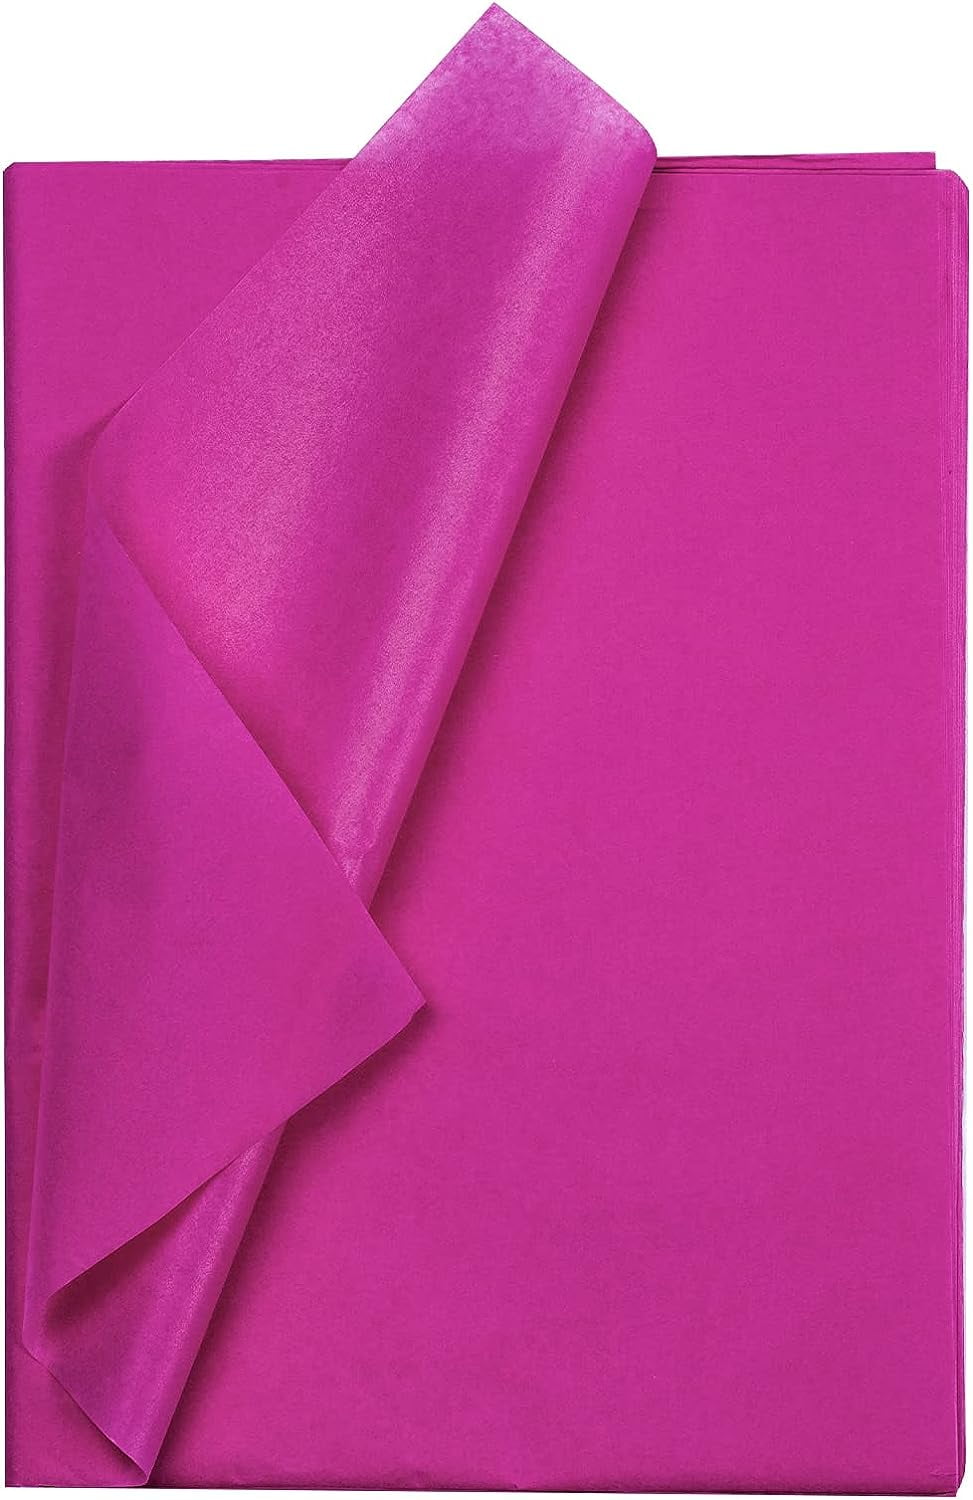 Hygloss Products Bleeding Tissue Paper Squares 2-Inch, 20 Assorted Colors for Arts & Crafts, DIY Projects, Scrapbooking, Greeting Cards, 480 Squares